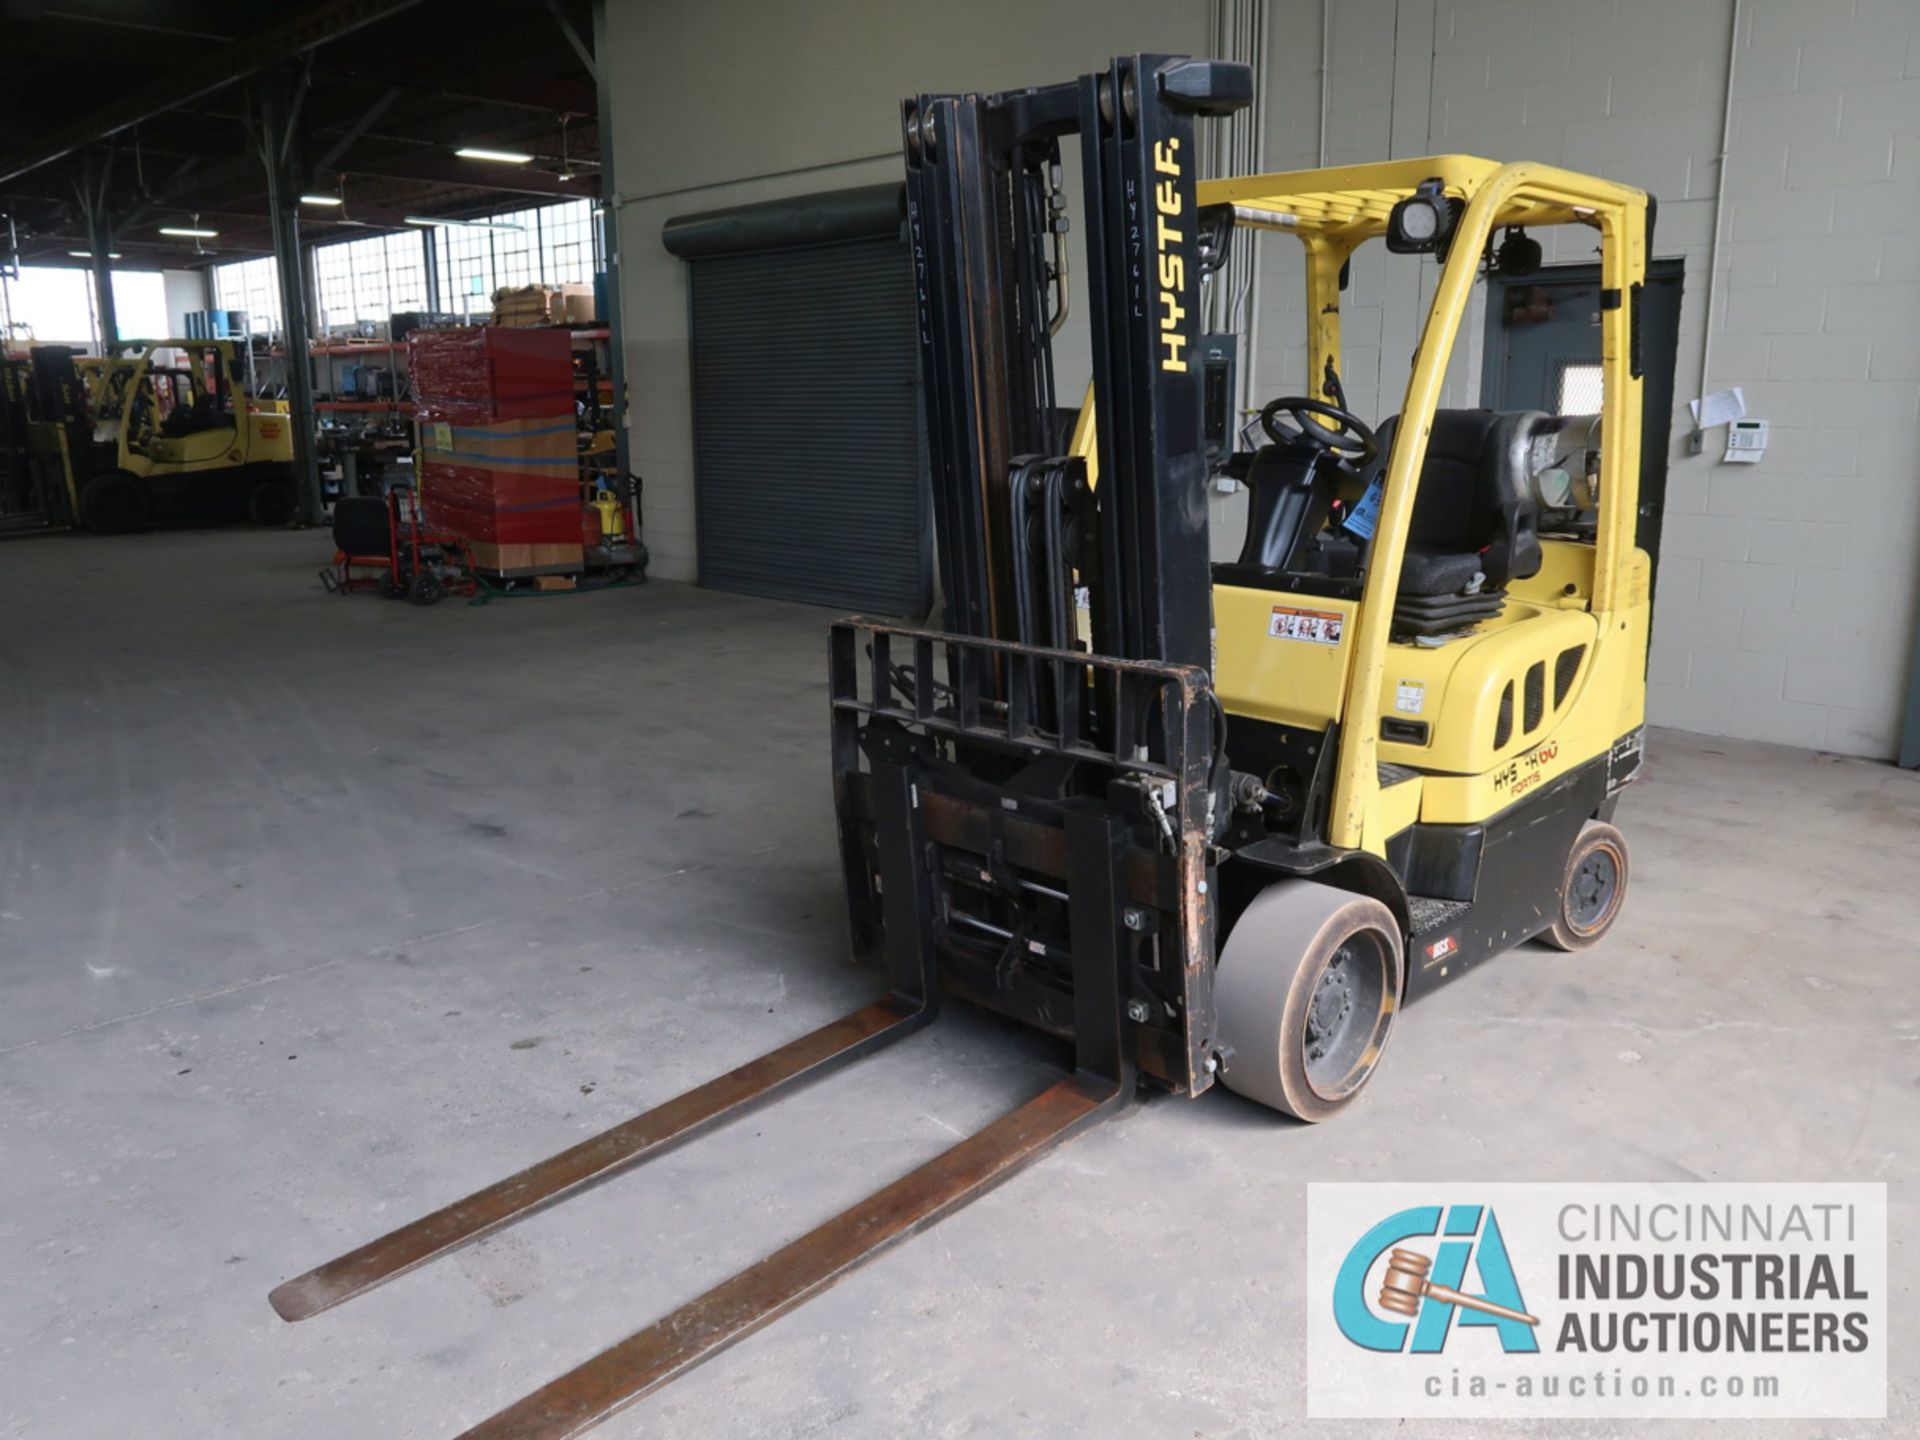 6,000 LB HYSTER MODEL S60FT LP GAS SOLID TIRE LIFT TRUCK WITH 3-STAGE MAST, 187" LIFT HEIGHT, 84"